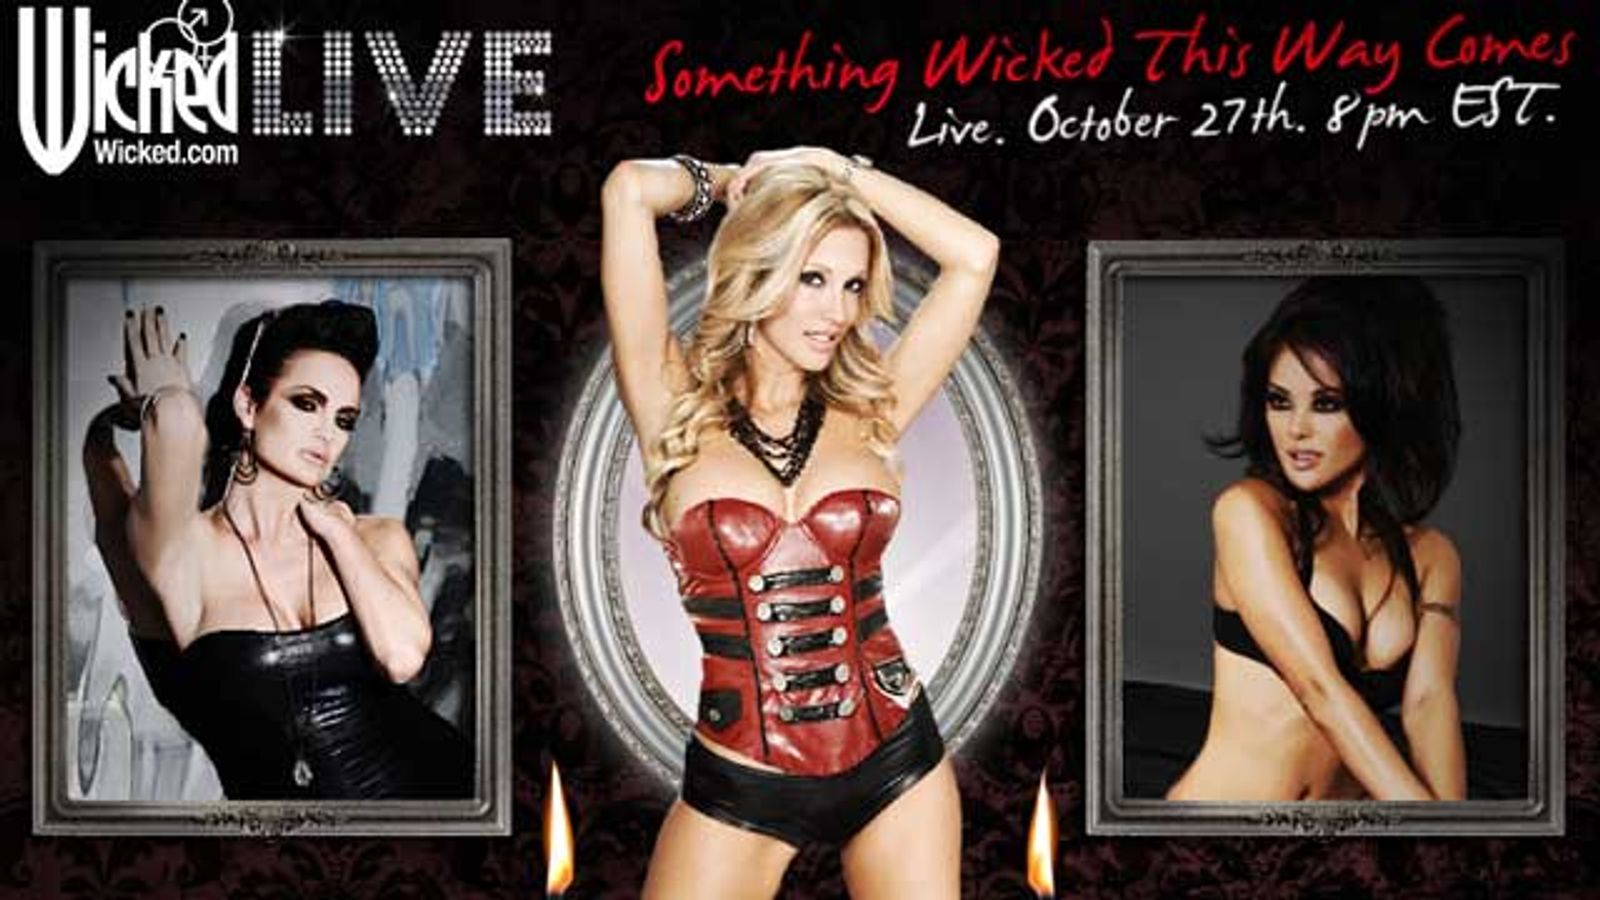 Wicked Girls In Live Halloween Event for Wicked.com Members